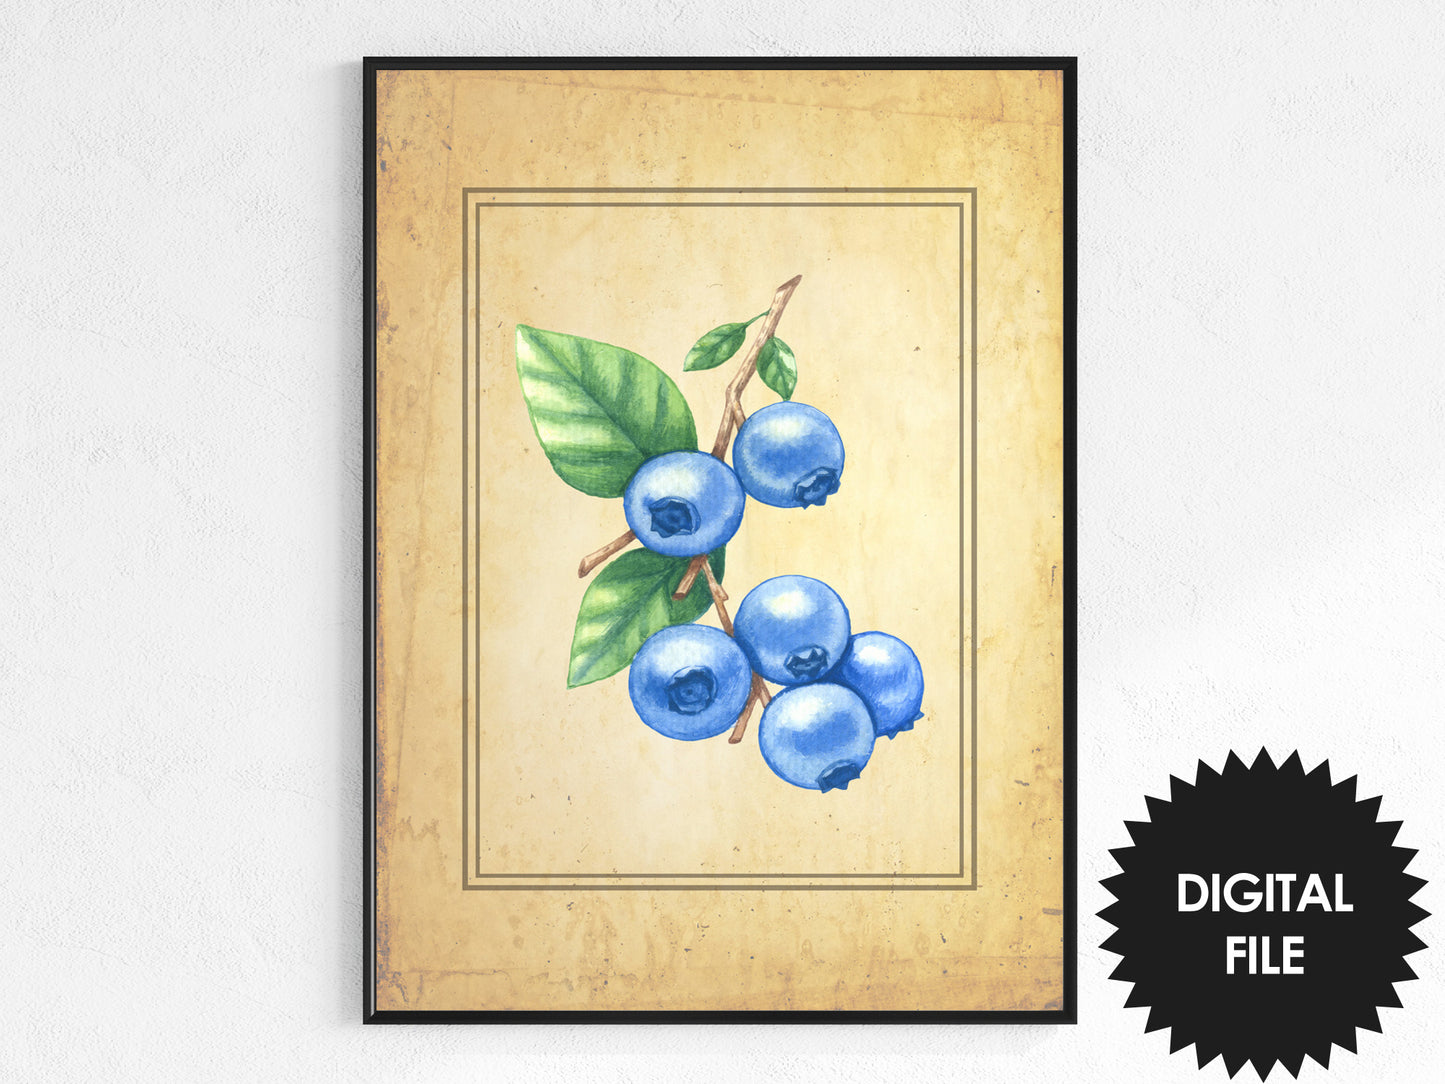 Vintage Fruit Prints Set of 6, Kitchen Wall Art, Digital Art, Download Now, Print at Home, A4 Size - 8.3 x 11.7 inches